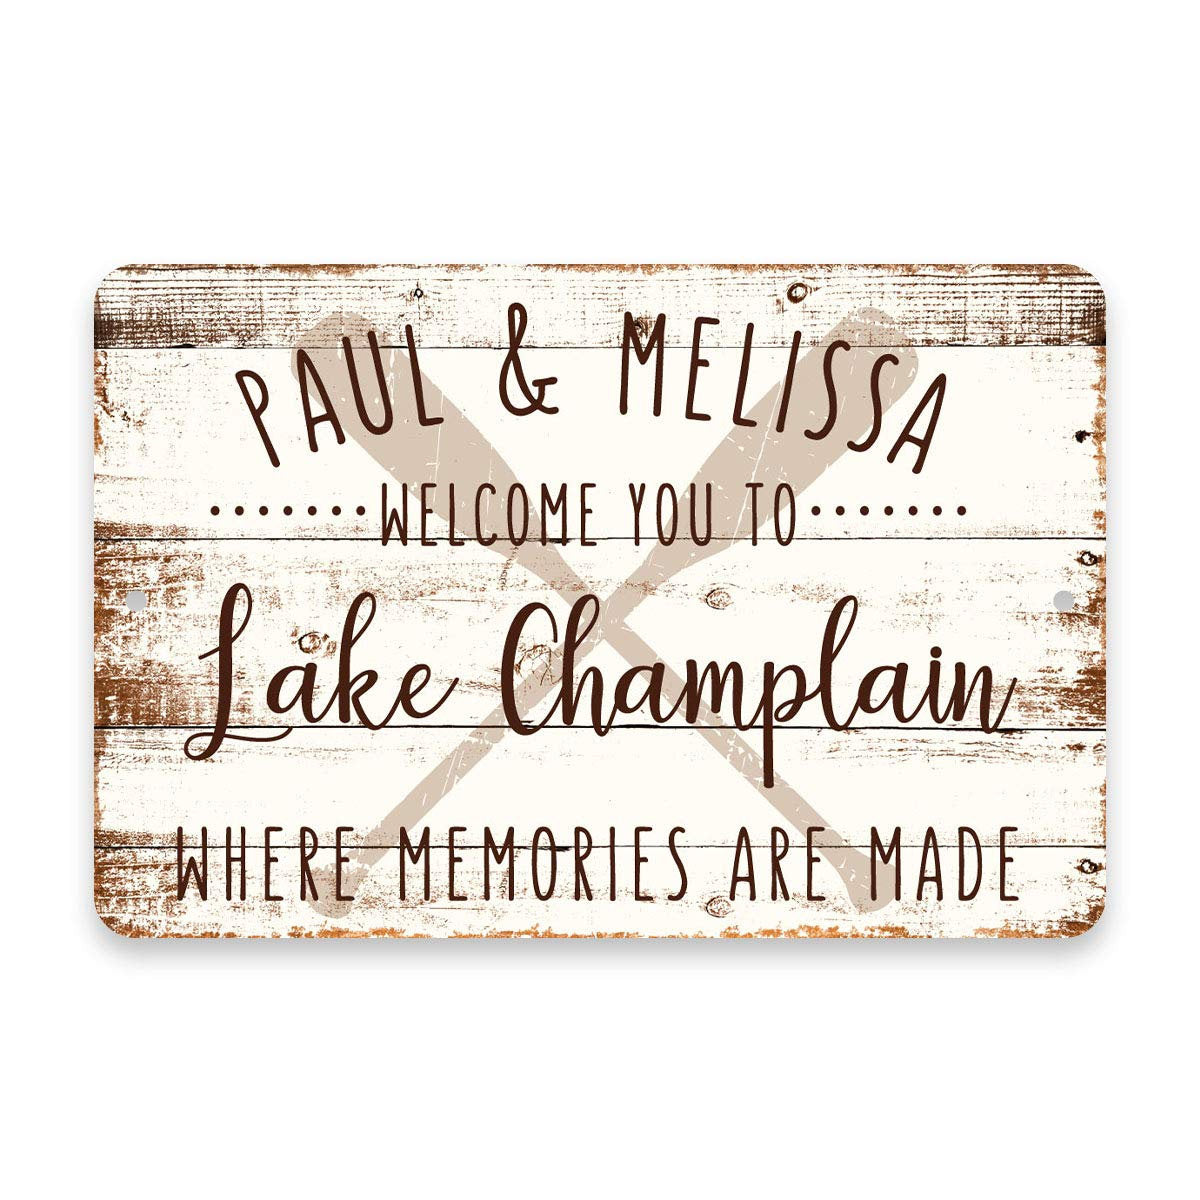 Personalized Welcome to Lake Champlain Where Memories are Made Sign - 8 X 12 Metal Sign with Wood Look